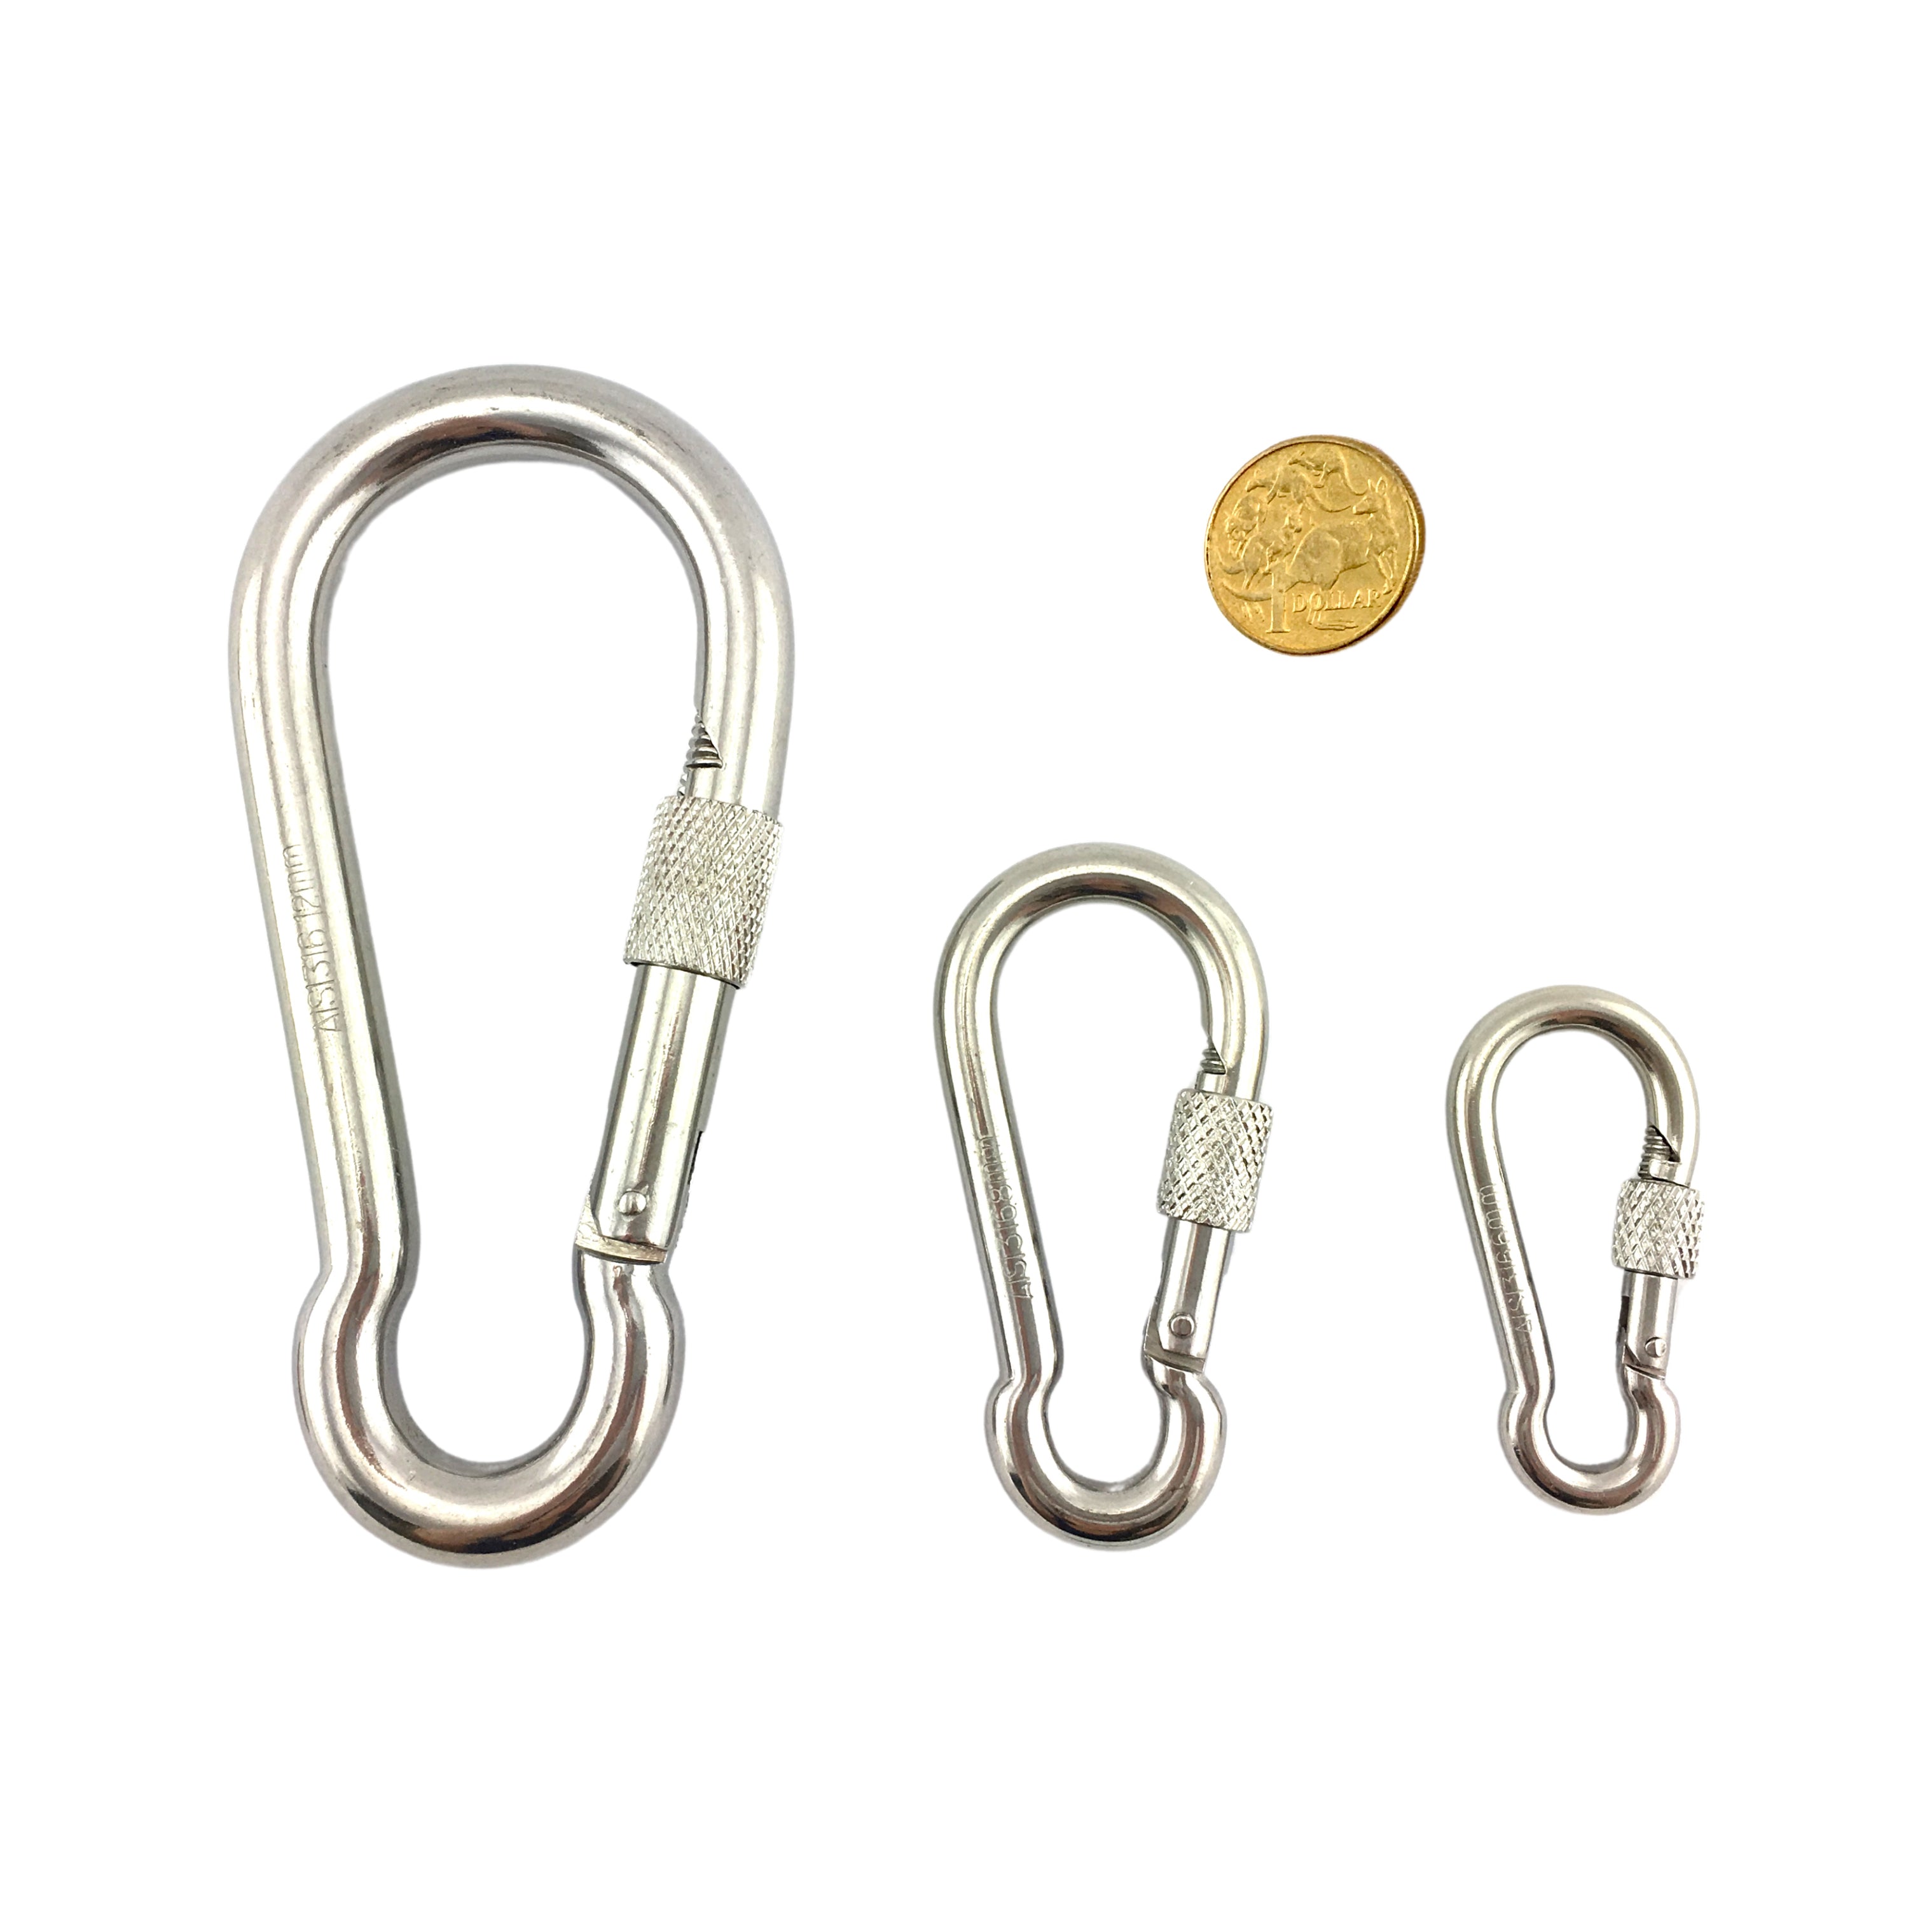 Stainless steel snap hook with locking screw gate (carabiner). Australia wide shipping. Shop chain.com.au